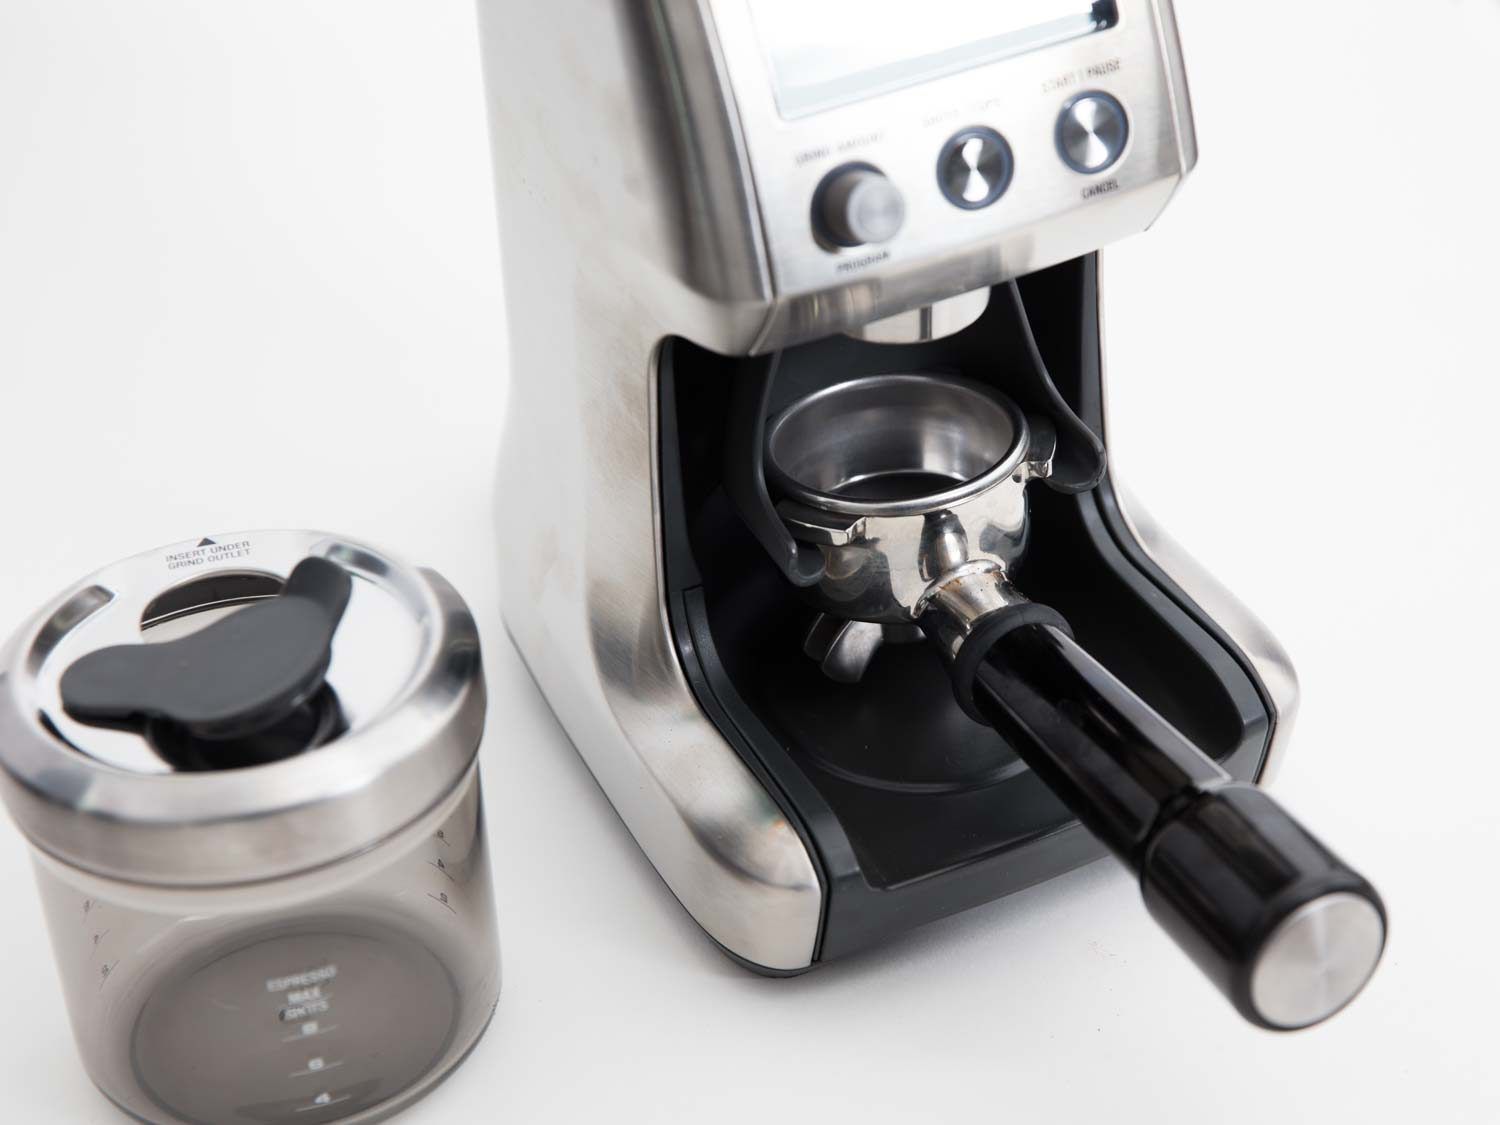 Breville coffee grinder with portafilter attachment